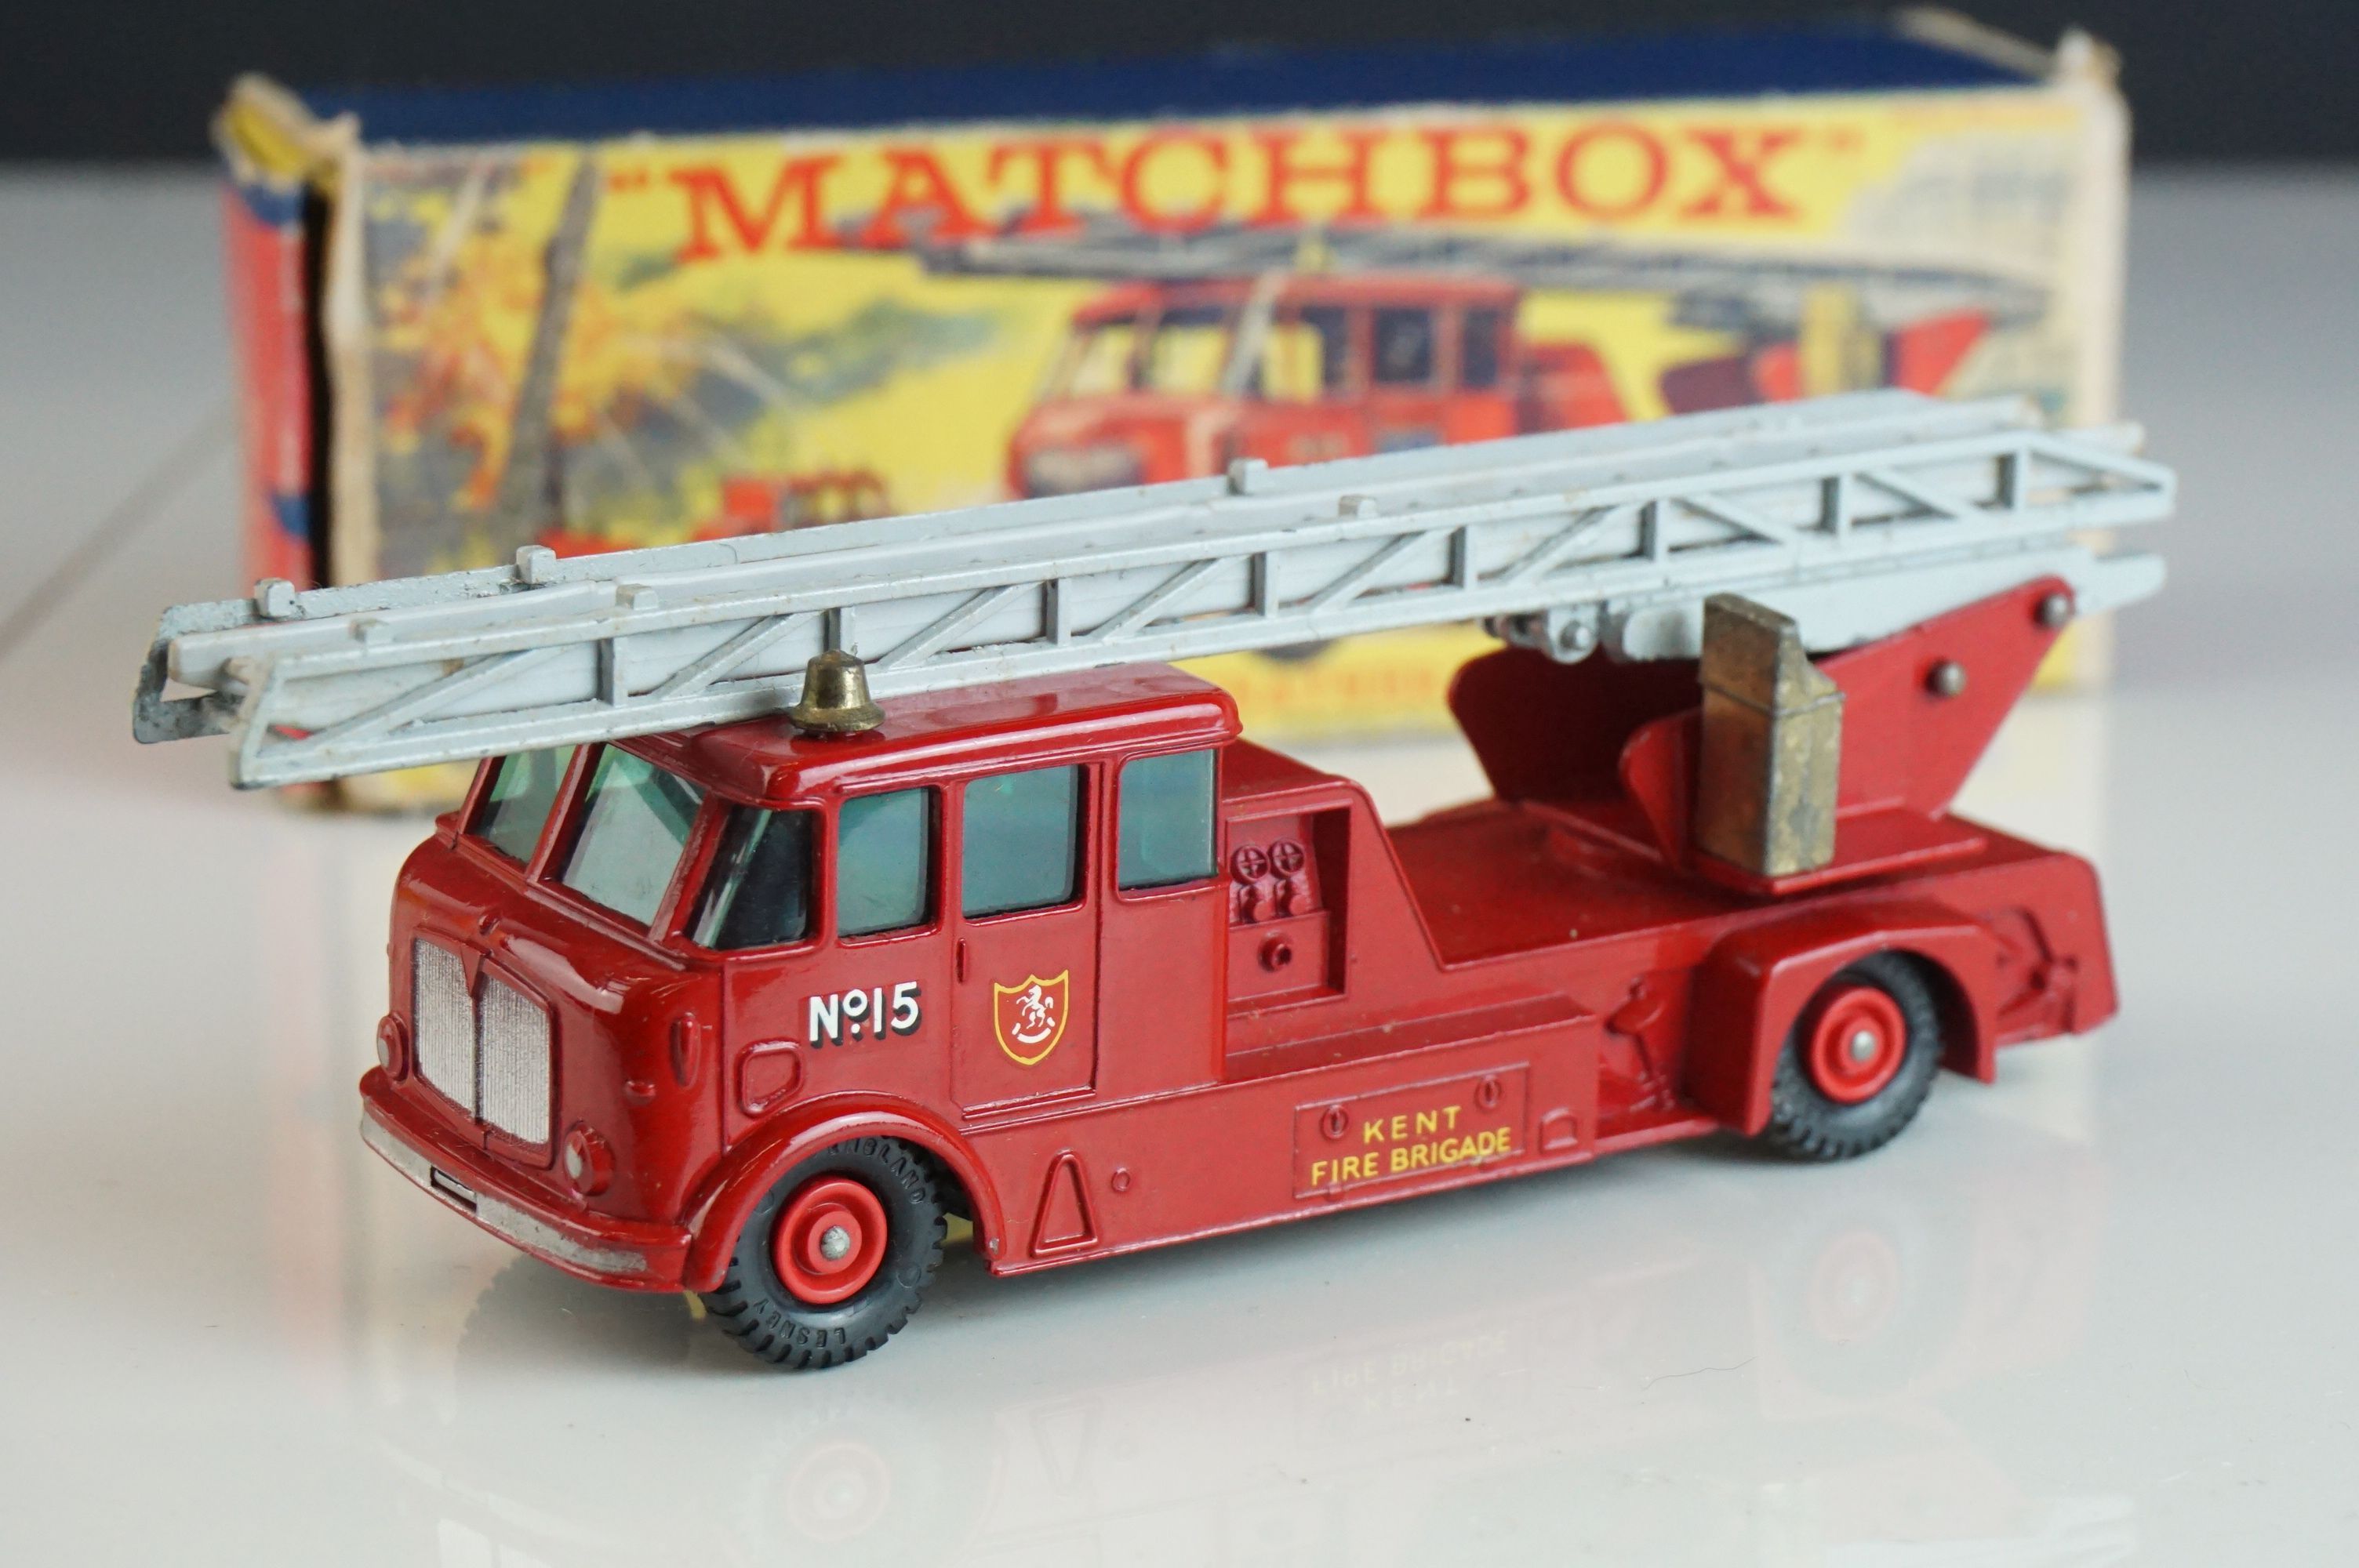 Boxed Matchbox K15 King Size Merryweather Fire Engine diecast model in vg condition with minimal - Image 2 of 8